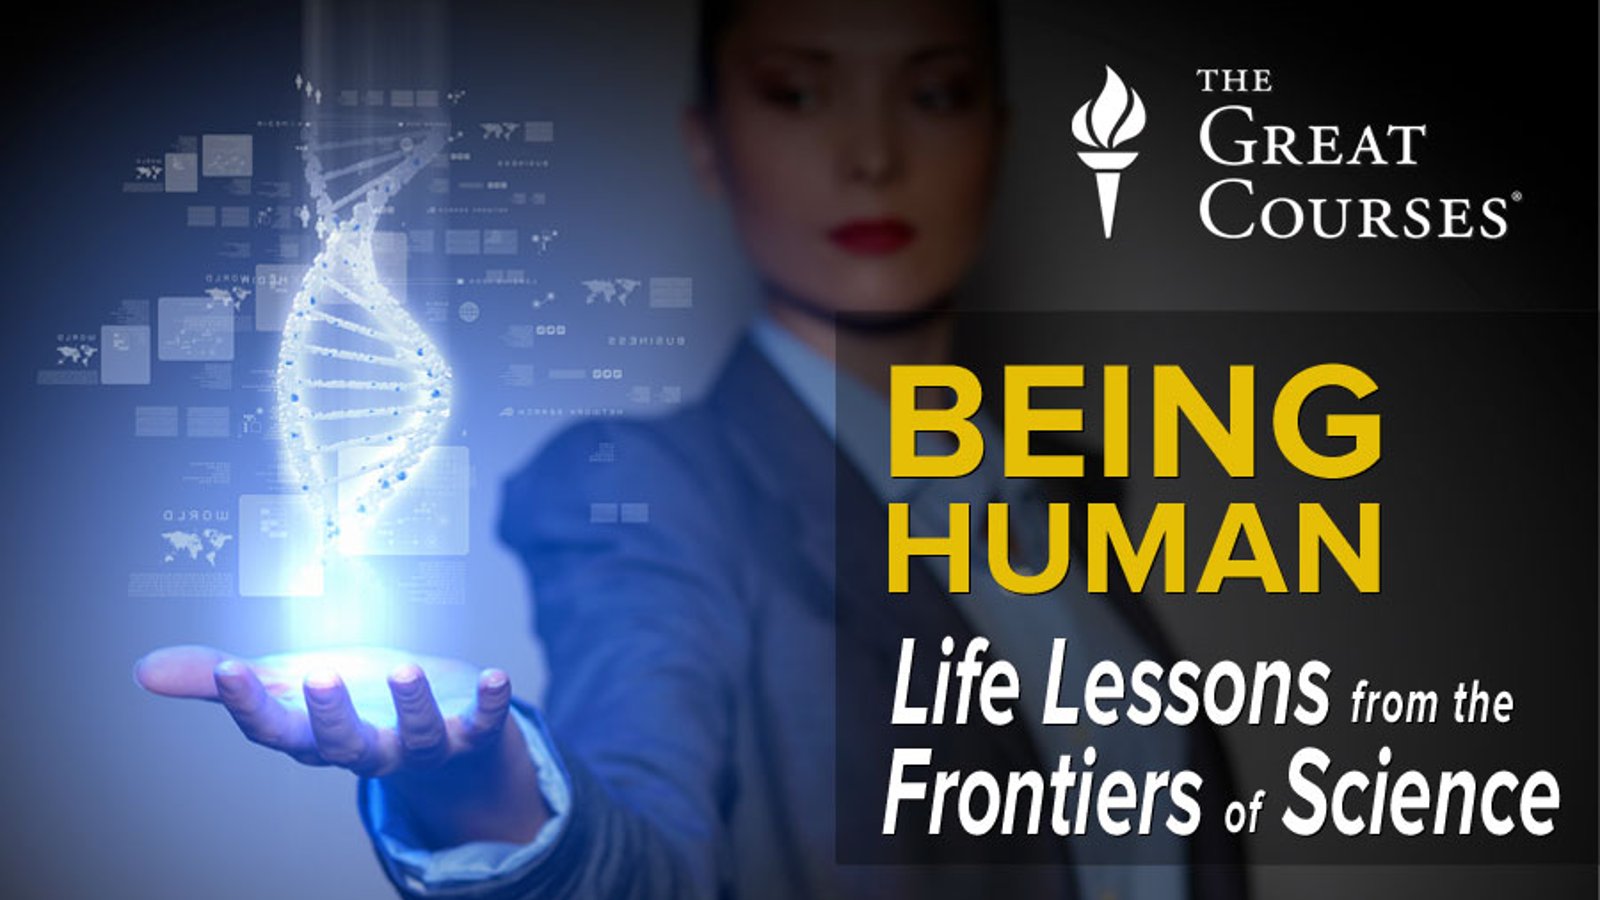 Being Human - Life Lessons from the Frontiers of Science